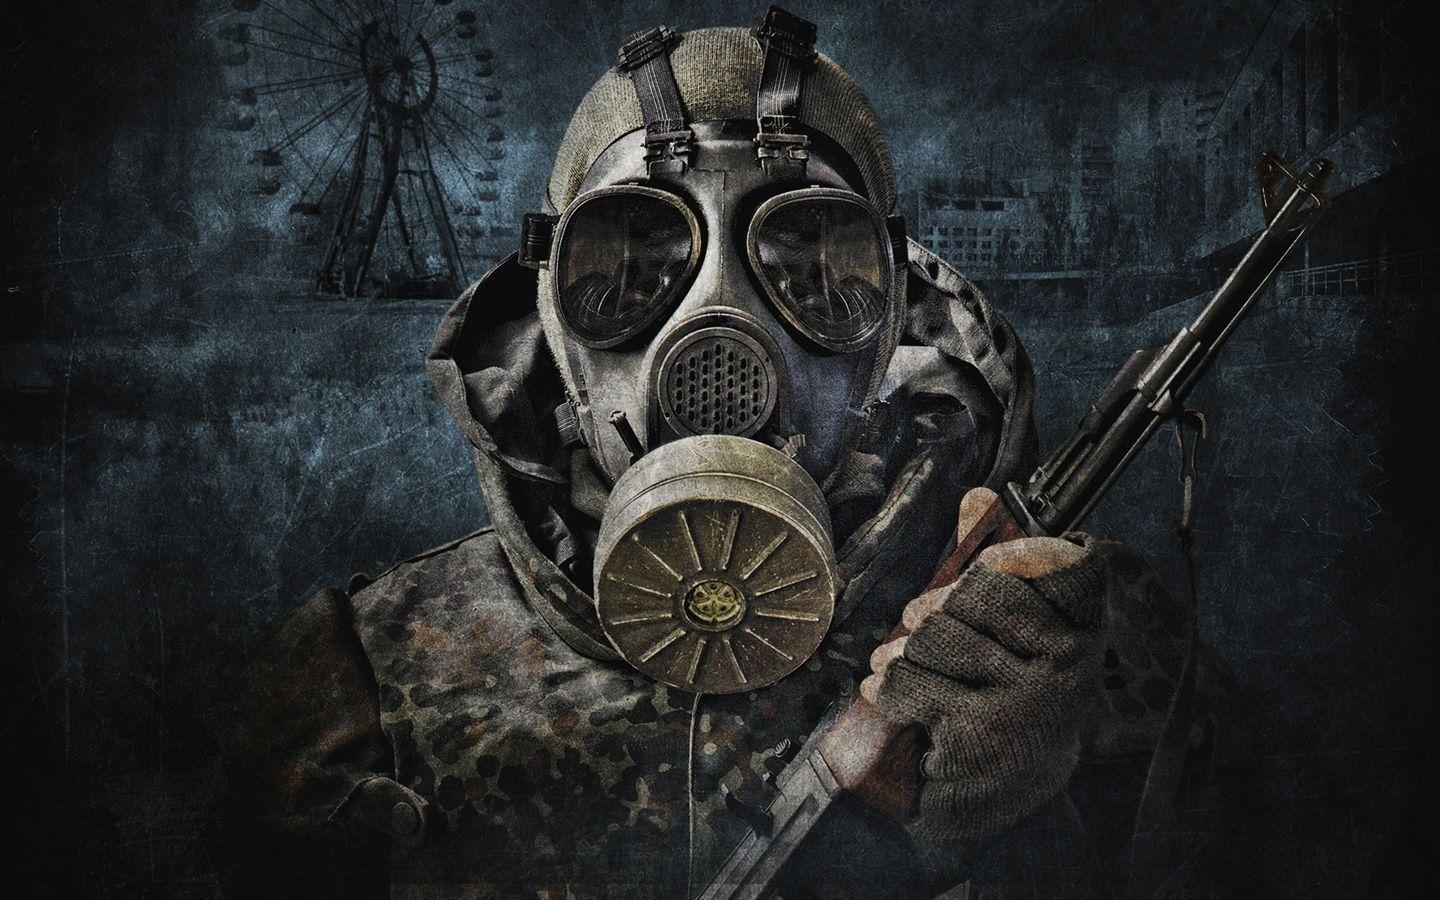 Free S.T.A.L.K.E.R.: Shadow of Chernobyl Wallpaper in 1440x900